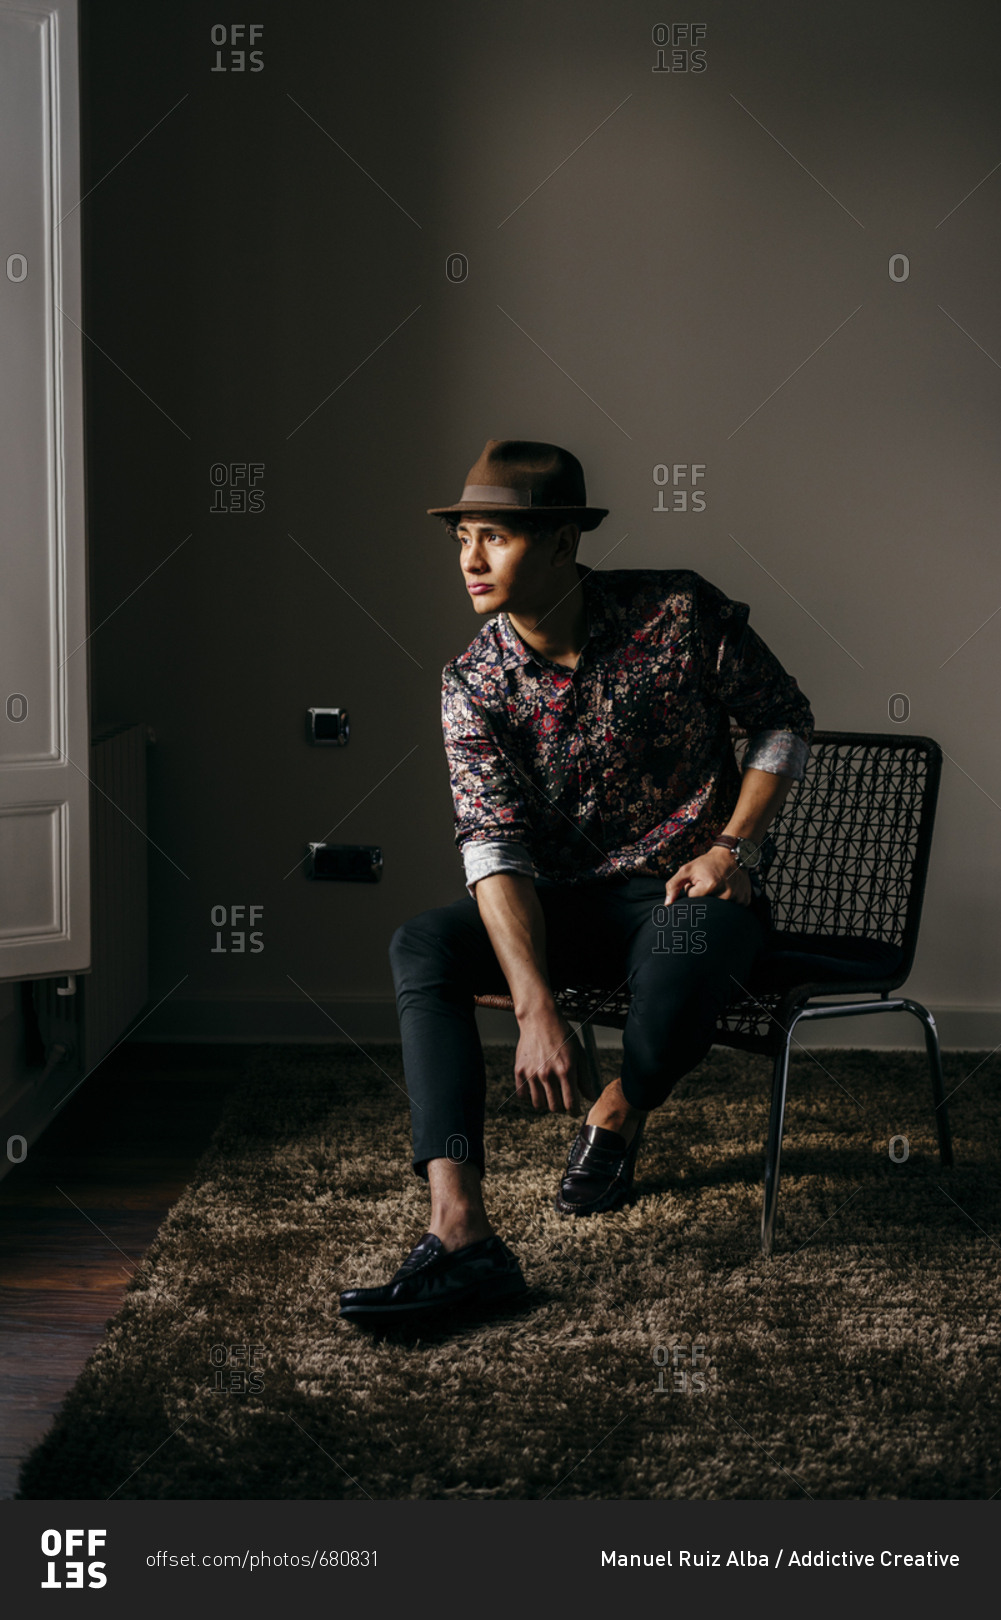 Man's photoshoot, man on a chair | Men photoshoot, Mens photoshoot poses,  Male portrait poses